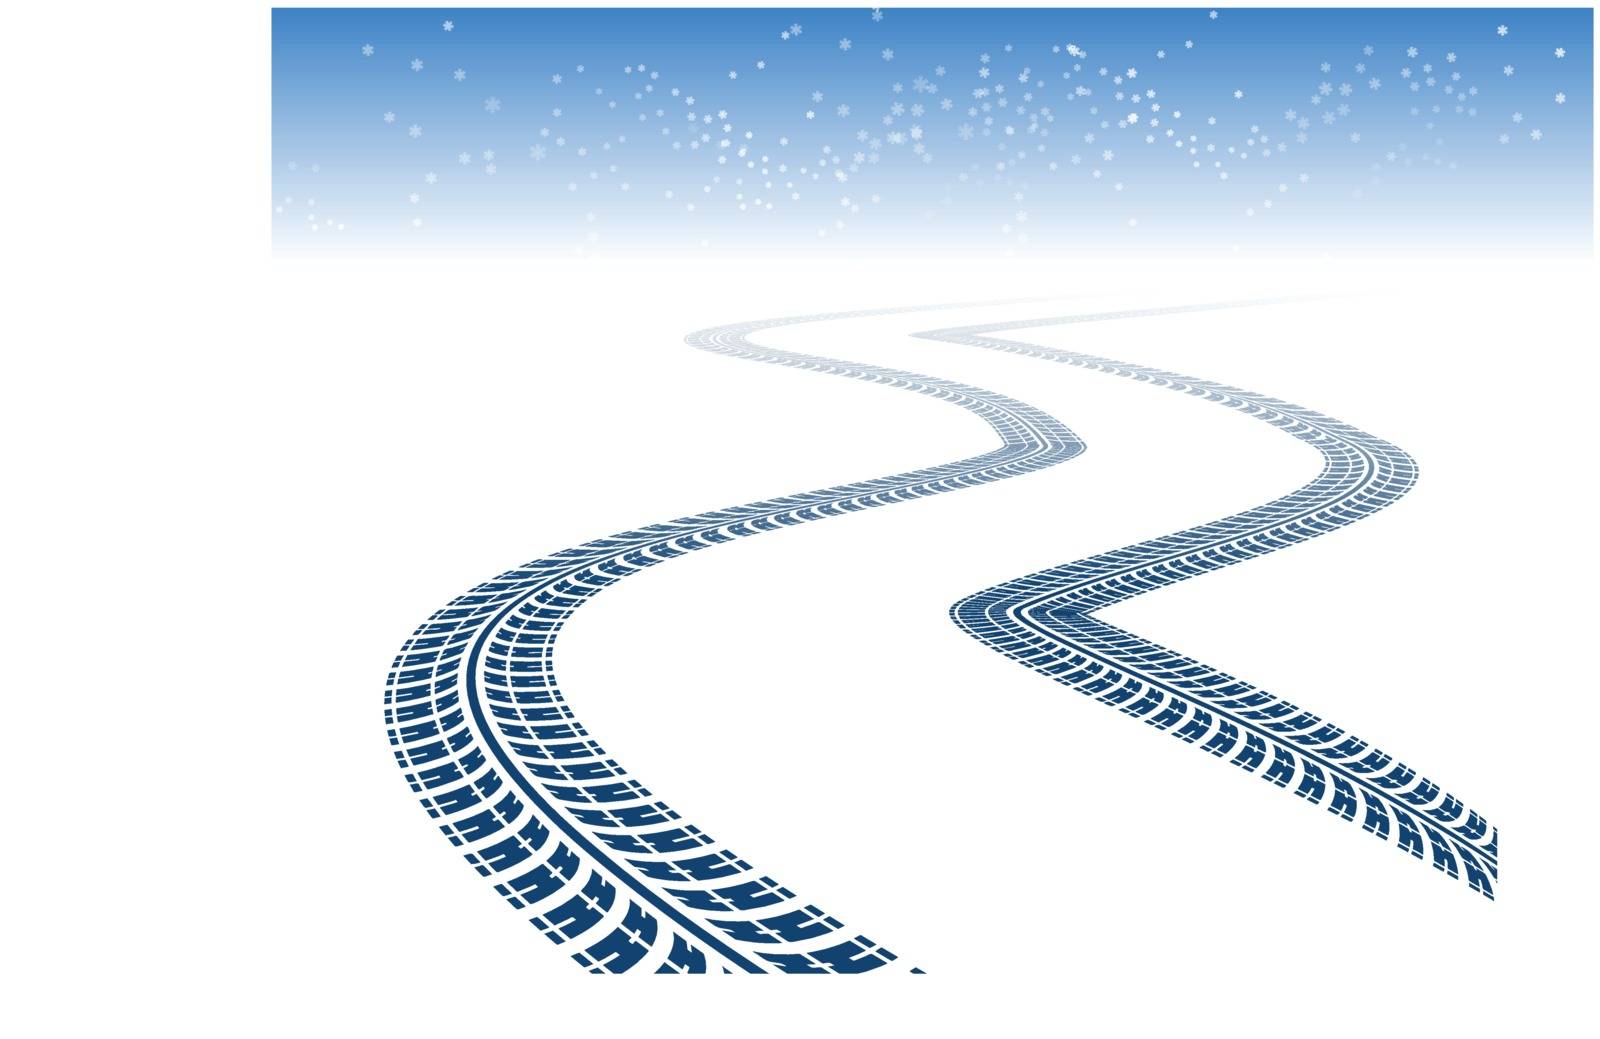 Winter tire tracks in perspective view with snowflakes